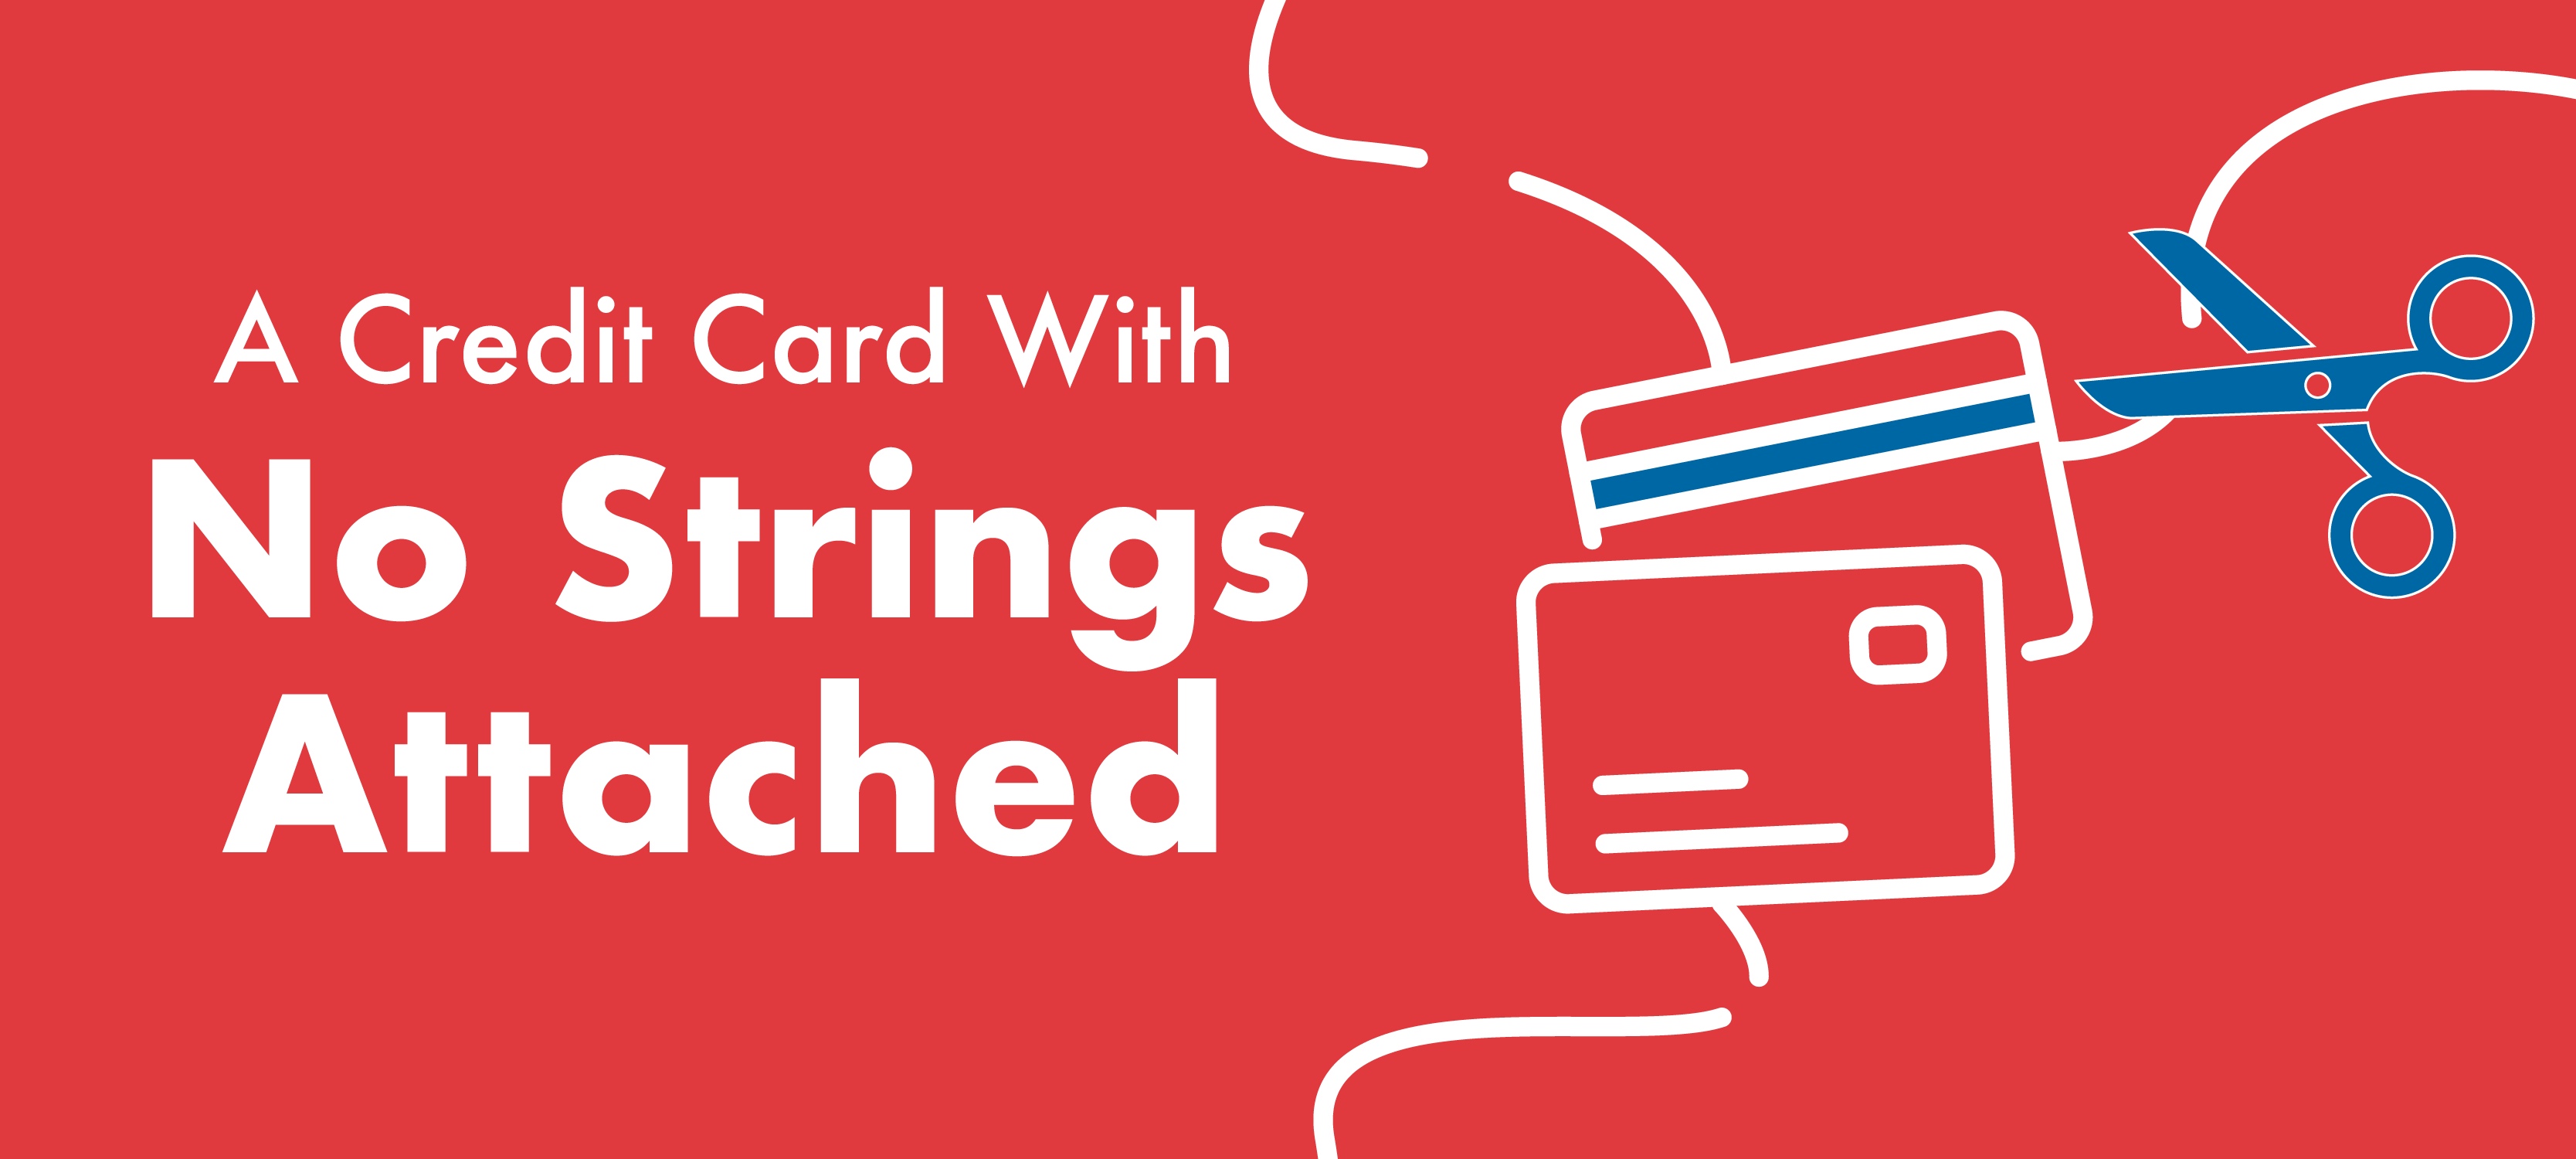 A Credit Card With No Strings Attached